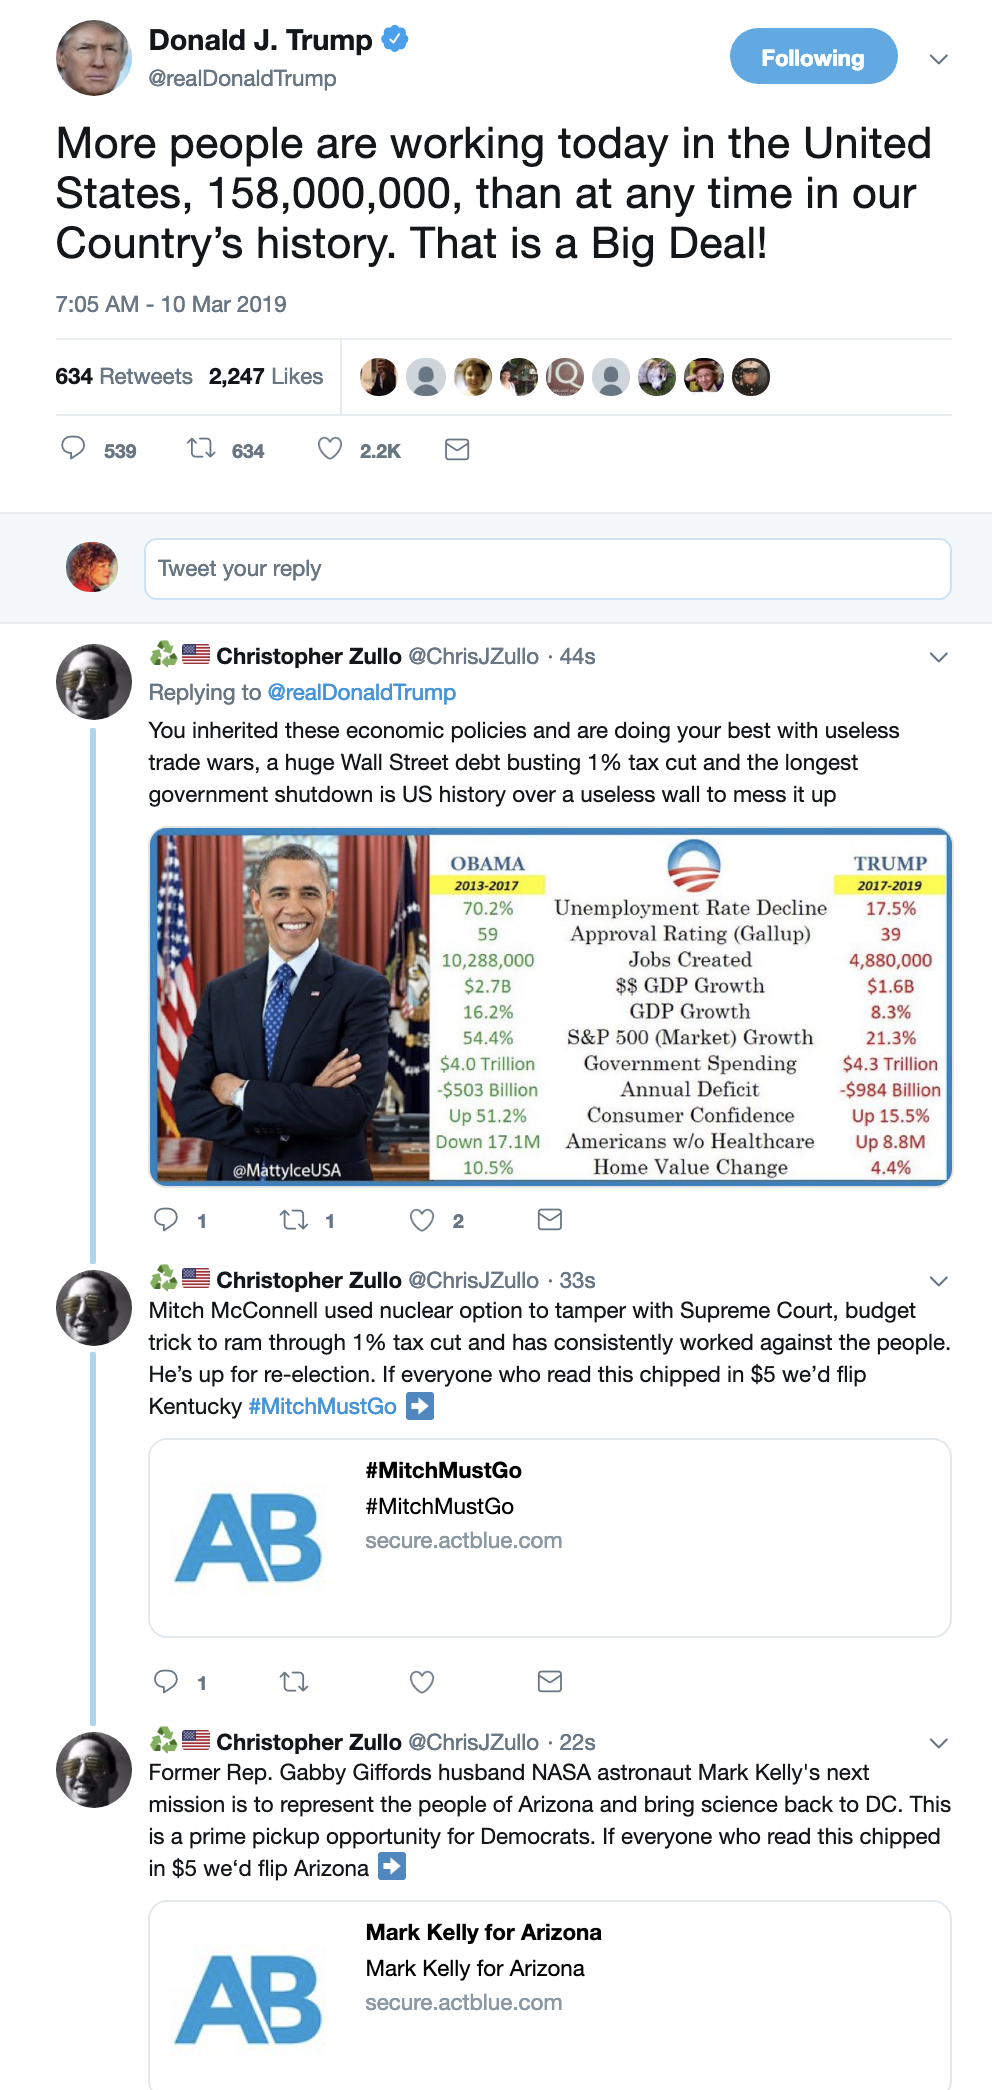 Screen-Shot-2019-03-10-at-7.09.27-AM Trump Explodes Into Sunday AM Twitter Tailspin Like A Bum Corruption Crime Donald Trump Economy Media Politics Top Stories 